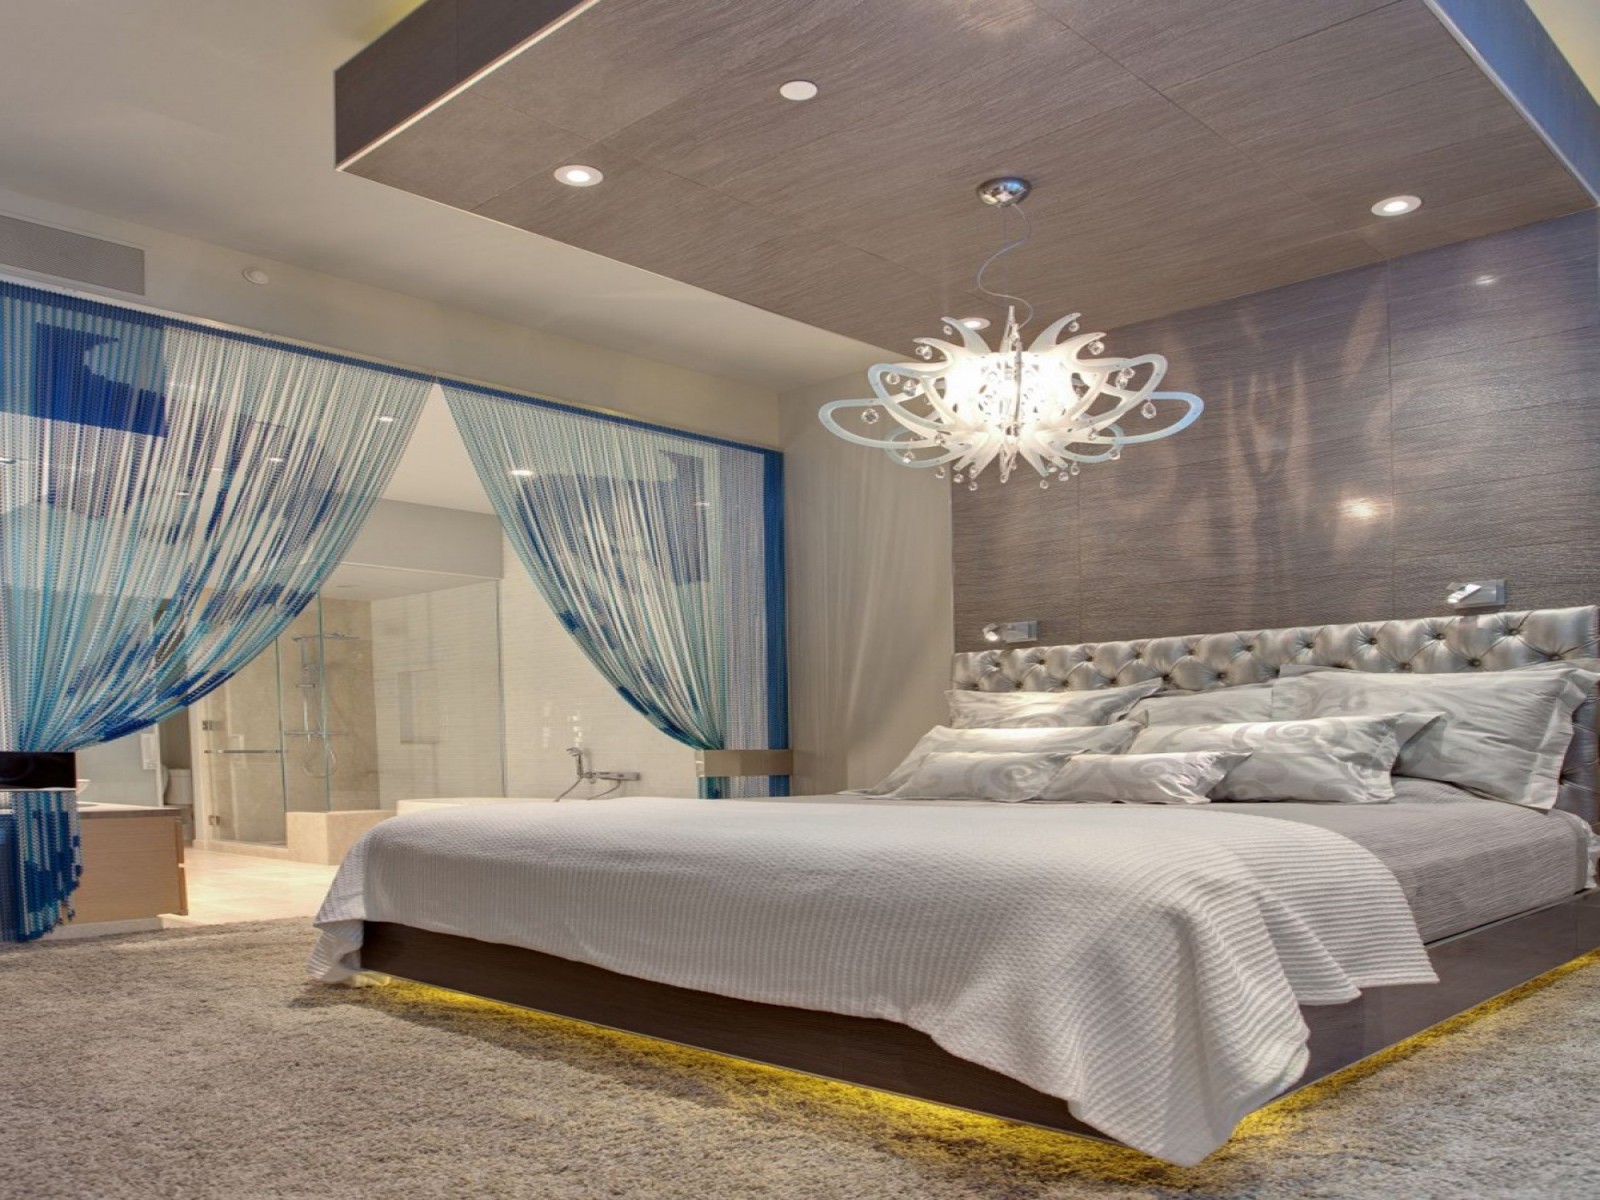 Essential Information On The Different Types Of Bedroom Ceiling Lights